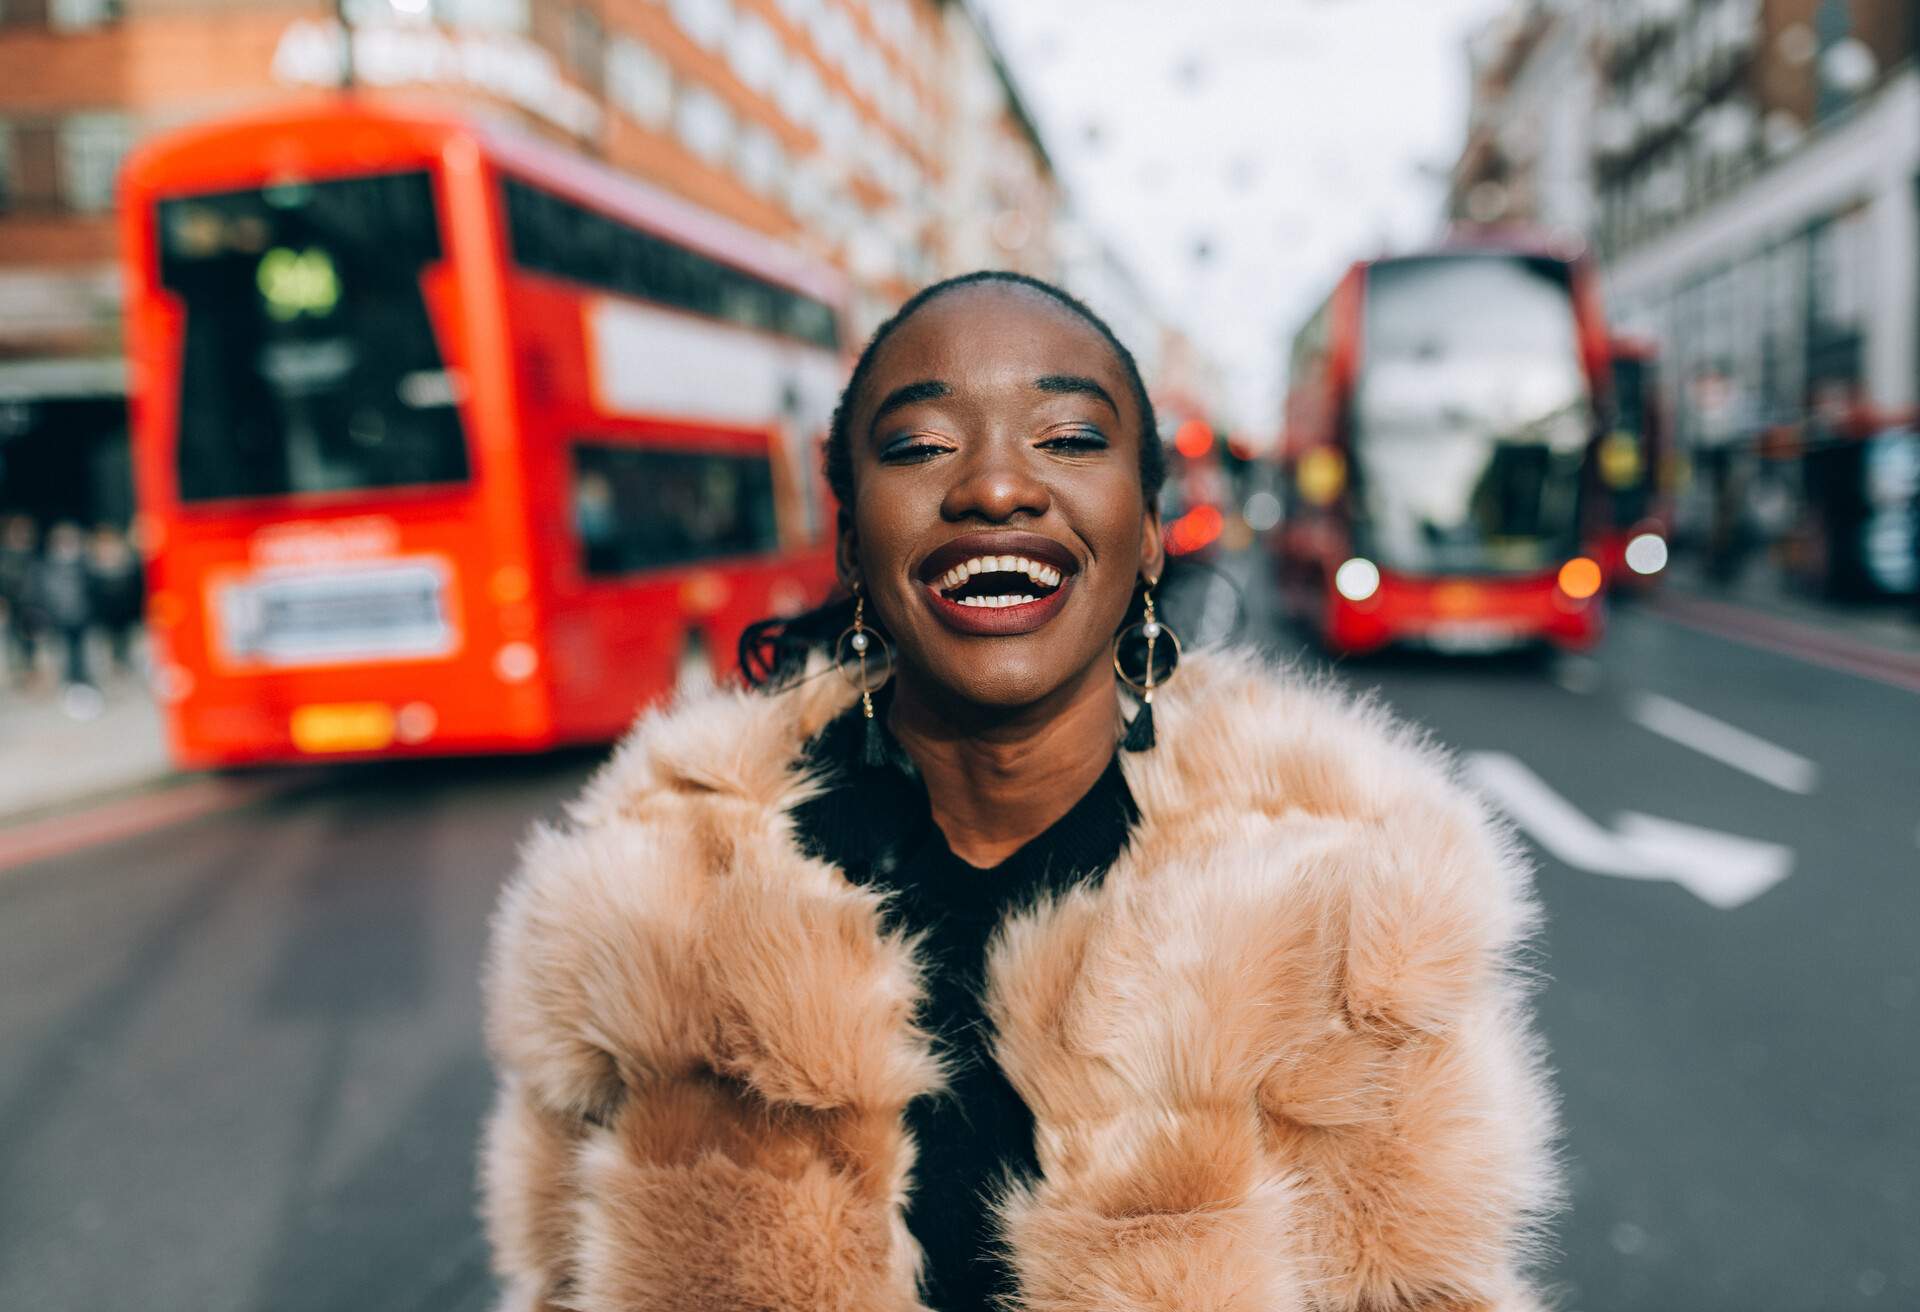 A happy dark-skinned lady with a fur jacket photographed in the middle of the street behind the red buses.